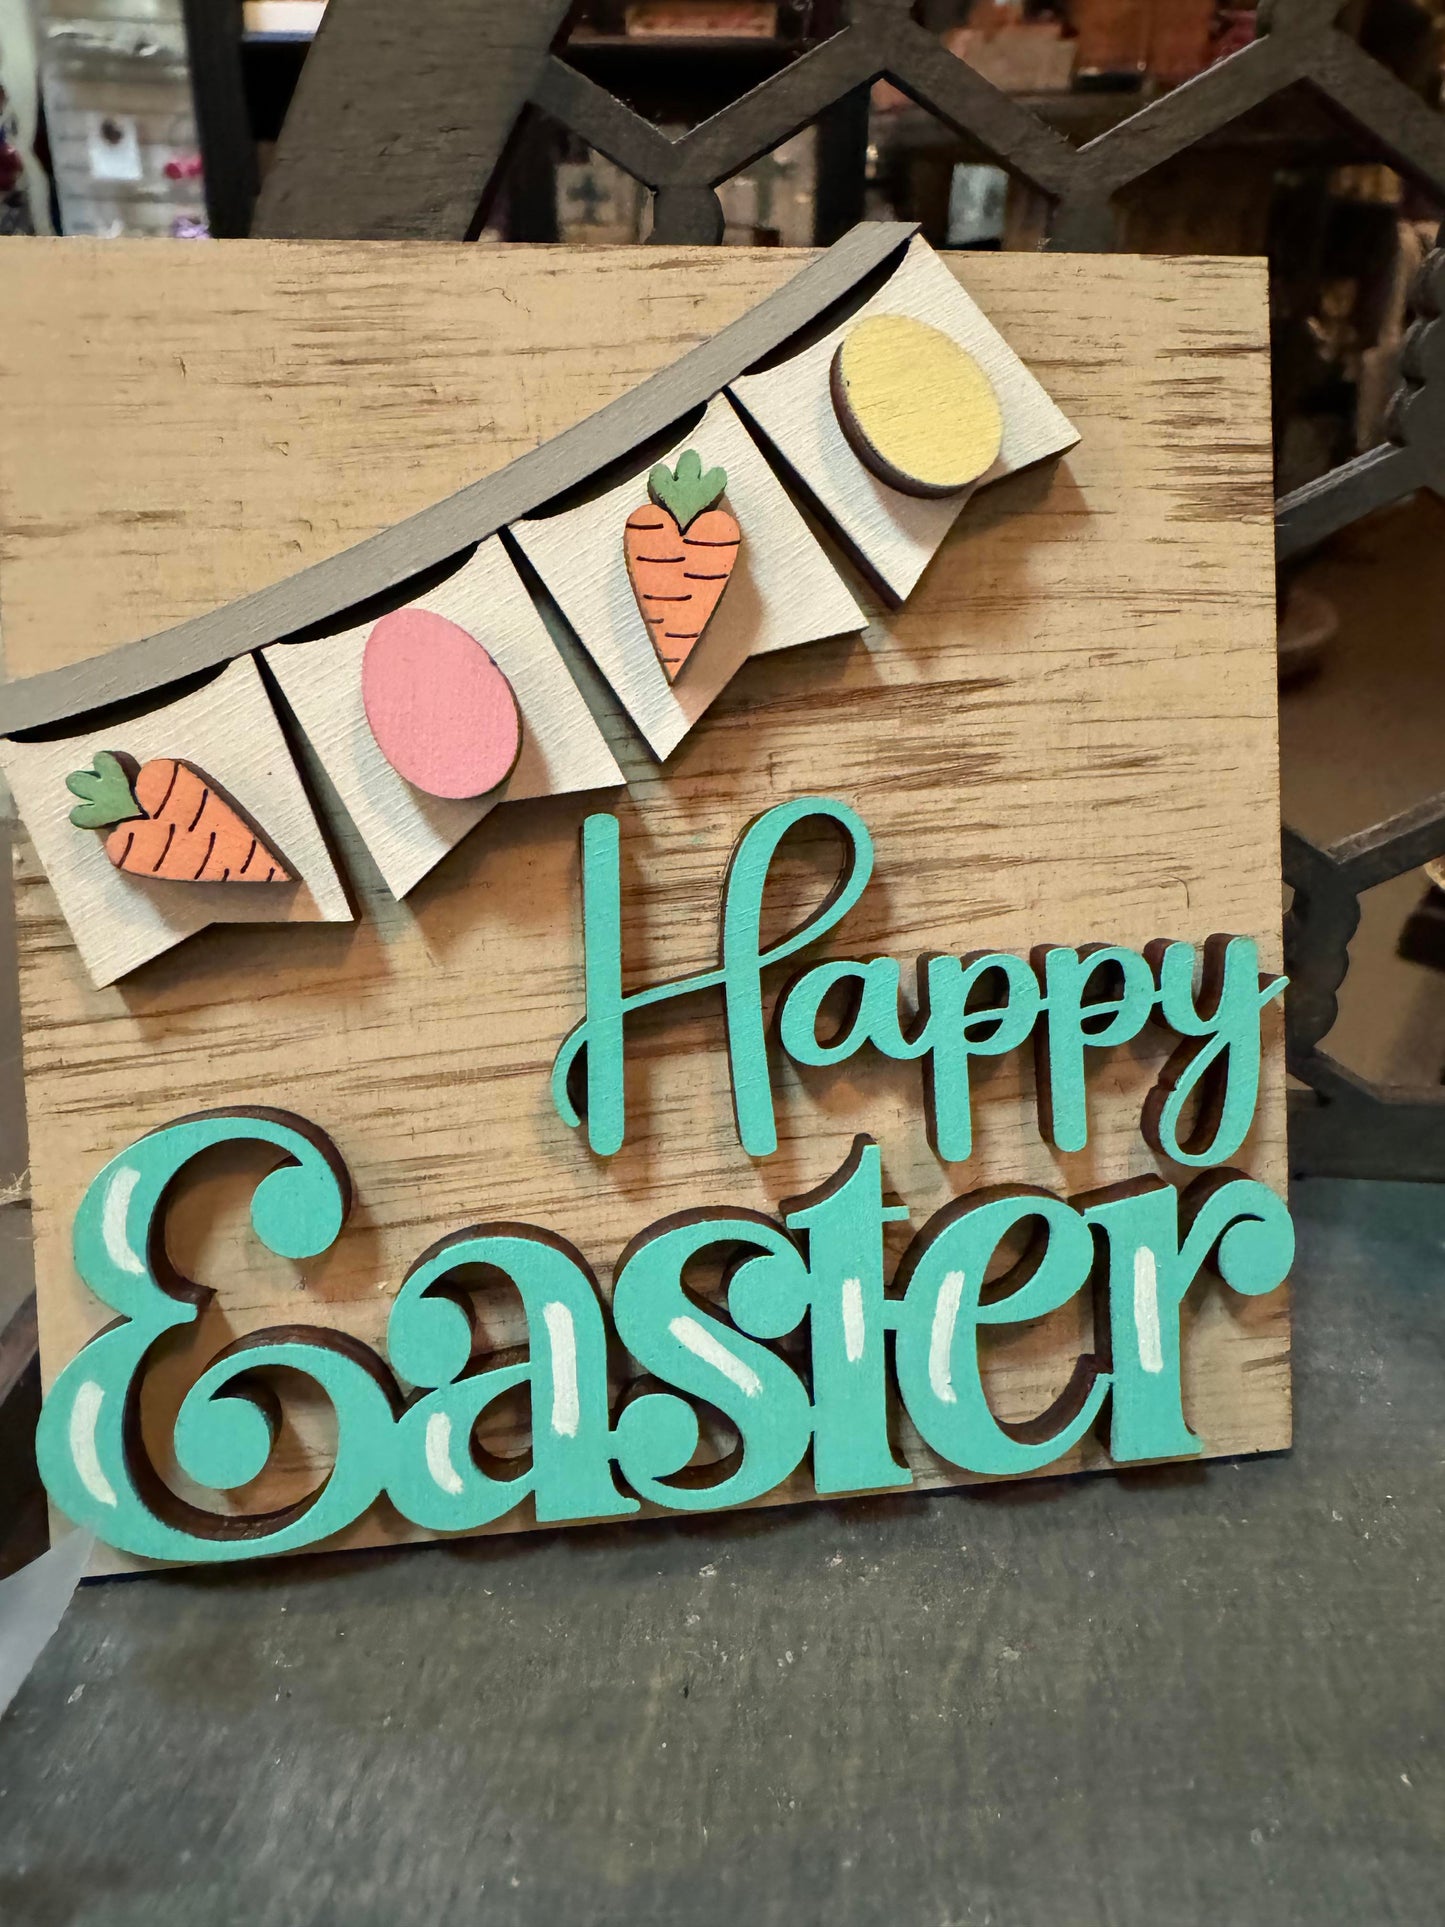 3D Tiered Tray Decor - Happy Easter Carrot Patch